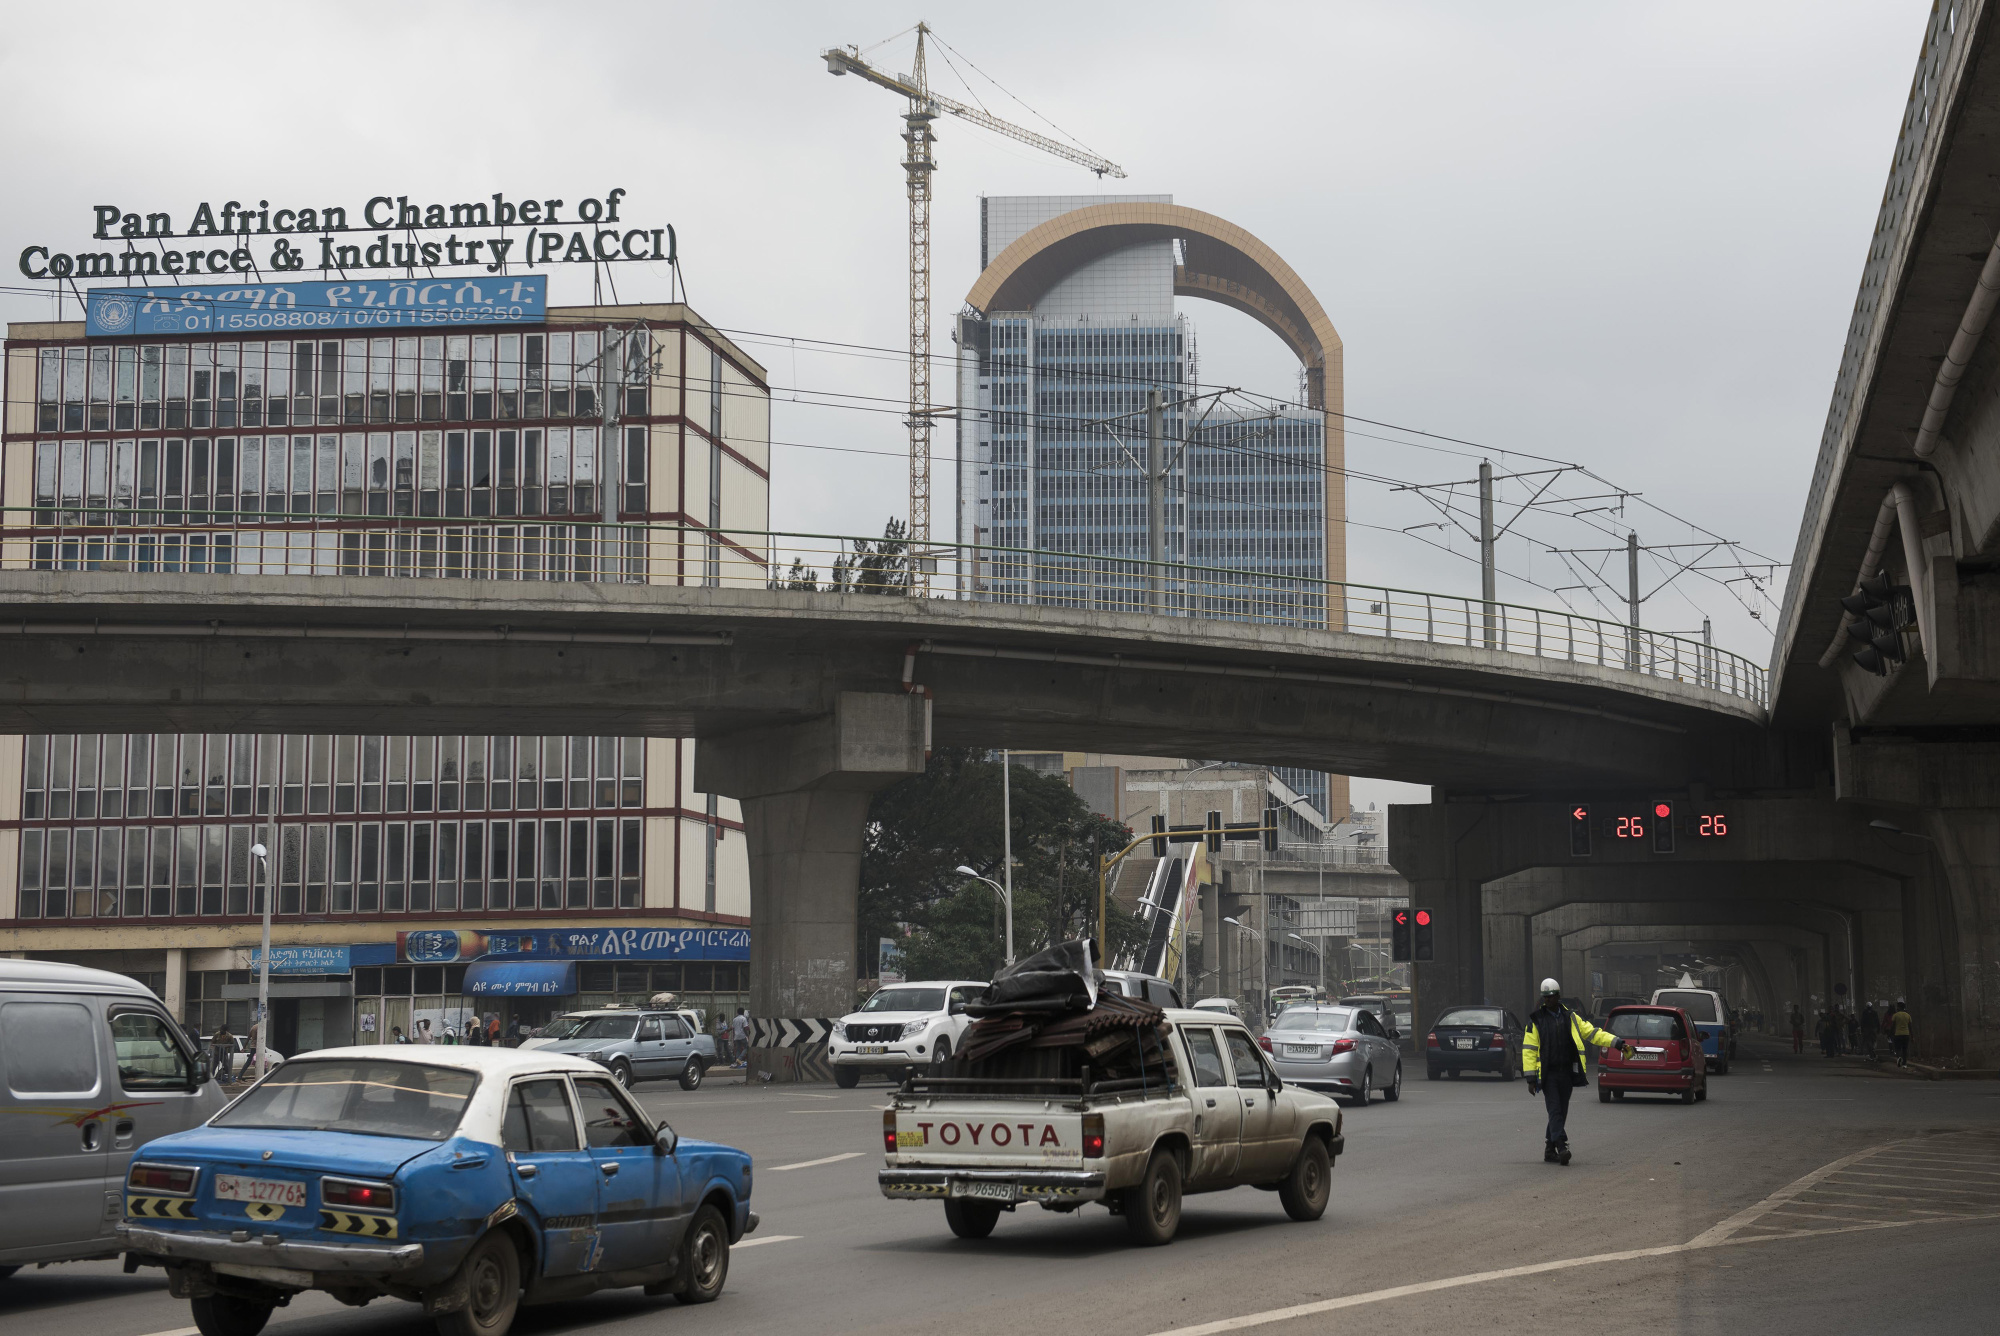 Office buildings&nbsp;stand beyond the Addis Ababa light rail track in Addis Ababa, Ethiopia.